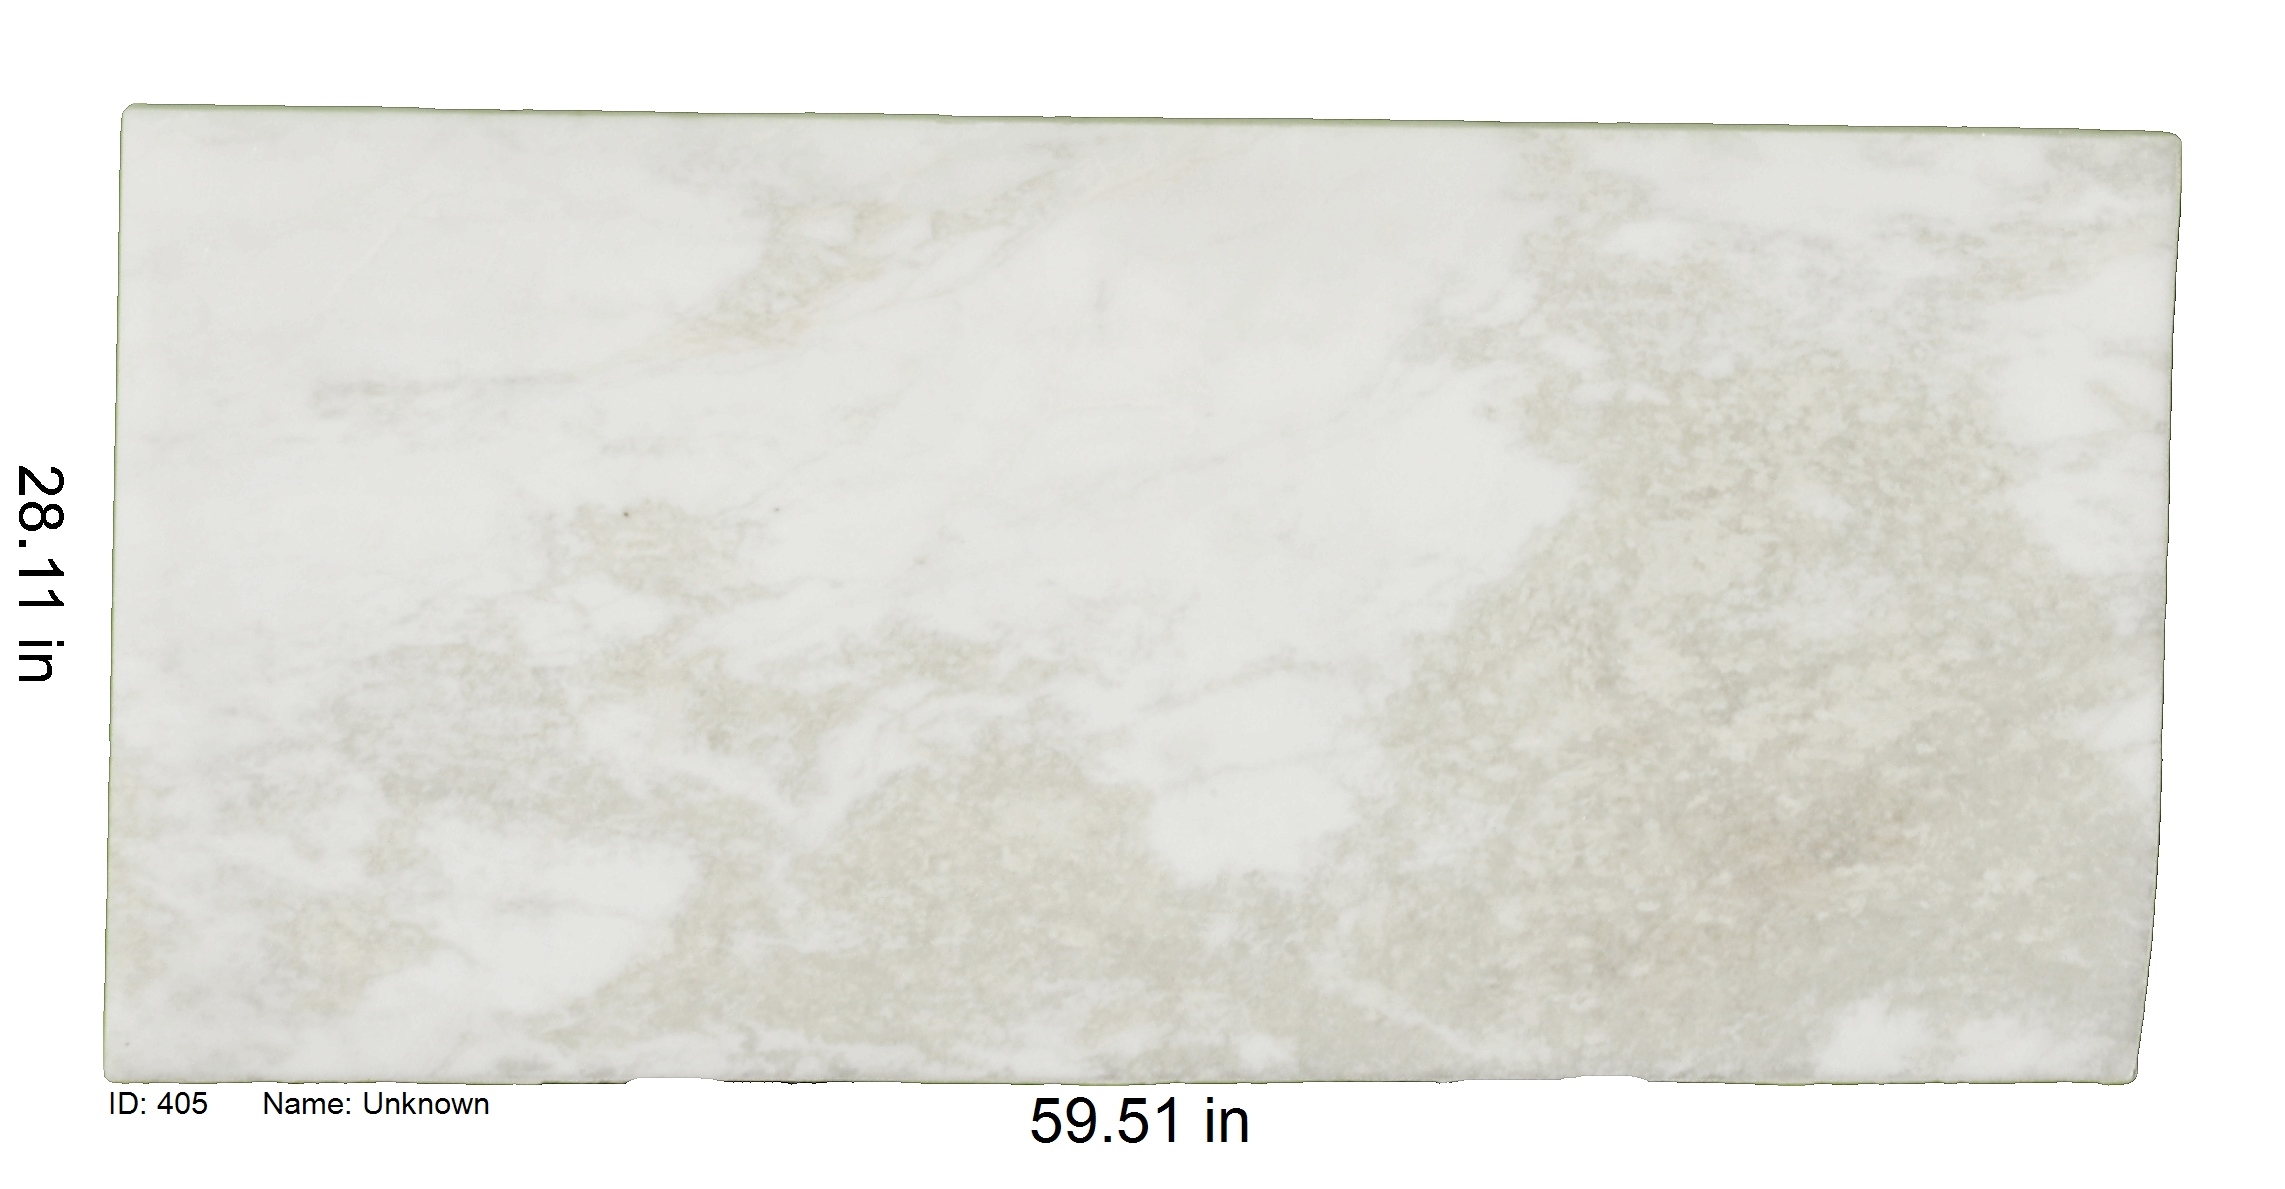 White Marble With Beige Veining<br />
ID: 405<br />
Name: Unknown<br />
Size: 28.11x59.51